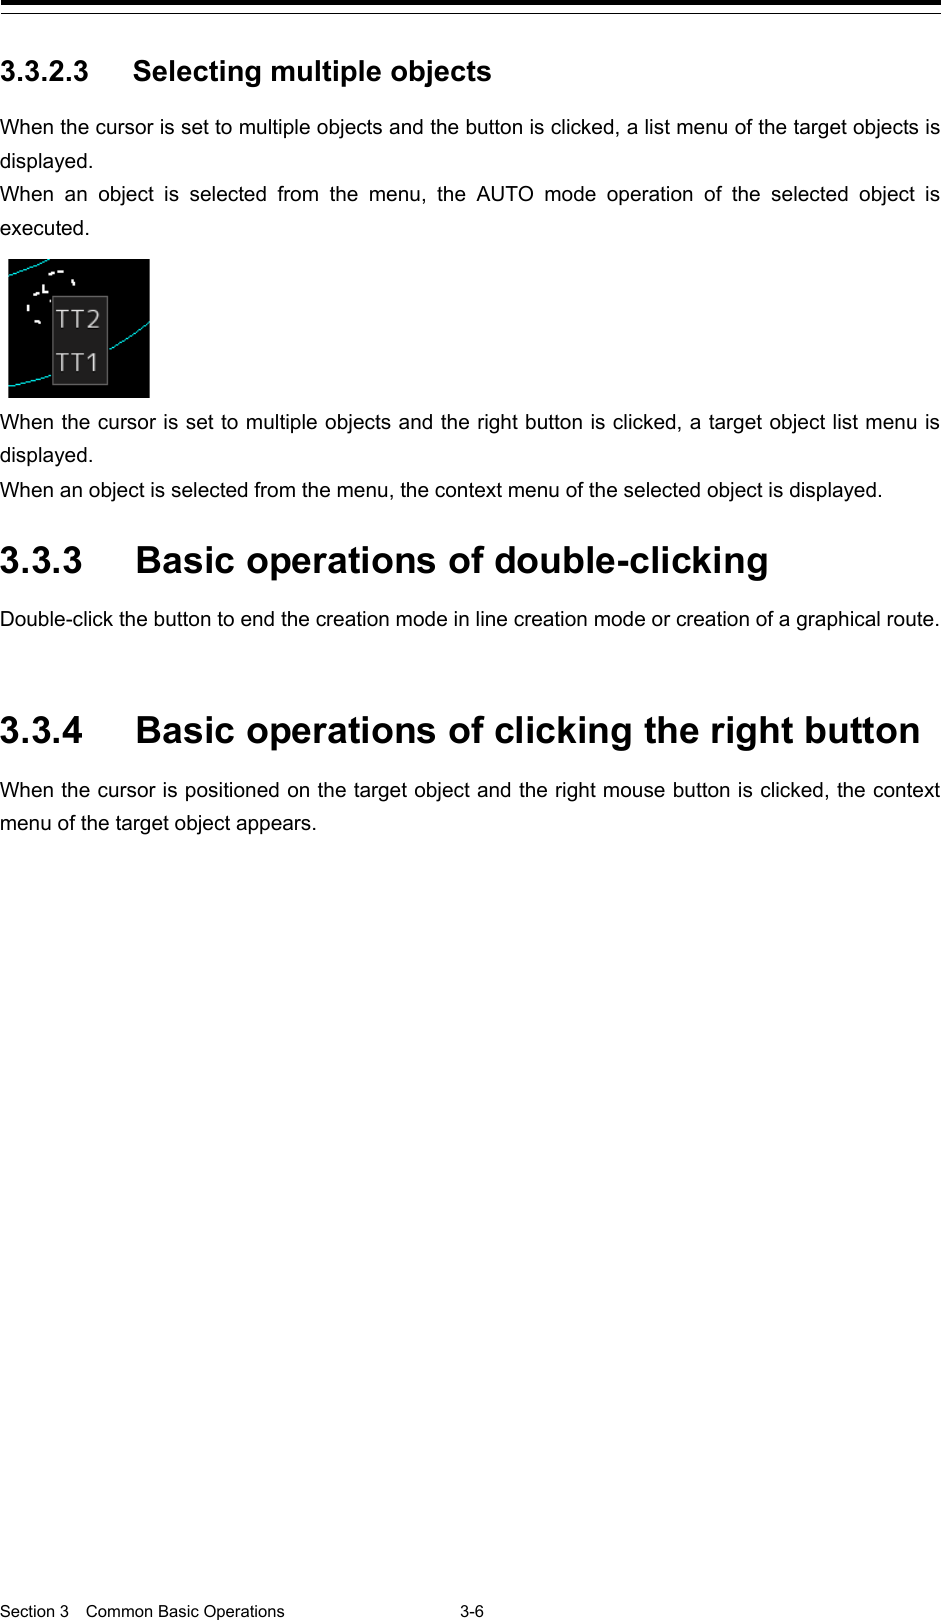  Section 3  Common Basic Operations  3-6  3.3.2.3 Selecting multiple objects When the cursor is set to multiple objects and the button is clicked, a list menu of the target objects is displayed.   When an object is selected from the menu, the AUTO mode operation of the selected object is executed.  When the cursor is set to multiple objects and the right button is clicked, a target object list menu is displayed. When an object is selected from the menu, the context menu of the selected object is displayed.  3.3.3 Basic operations of double-clicking Double-click the button to end the creation mode in line creation mode or creation of a graphical route.   3.3.4 Basic operations of clicking the right button When the cursor is positioned on the target object and the right mouse button is clicked, the context menu of the target object appears.      